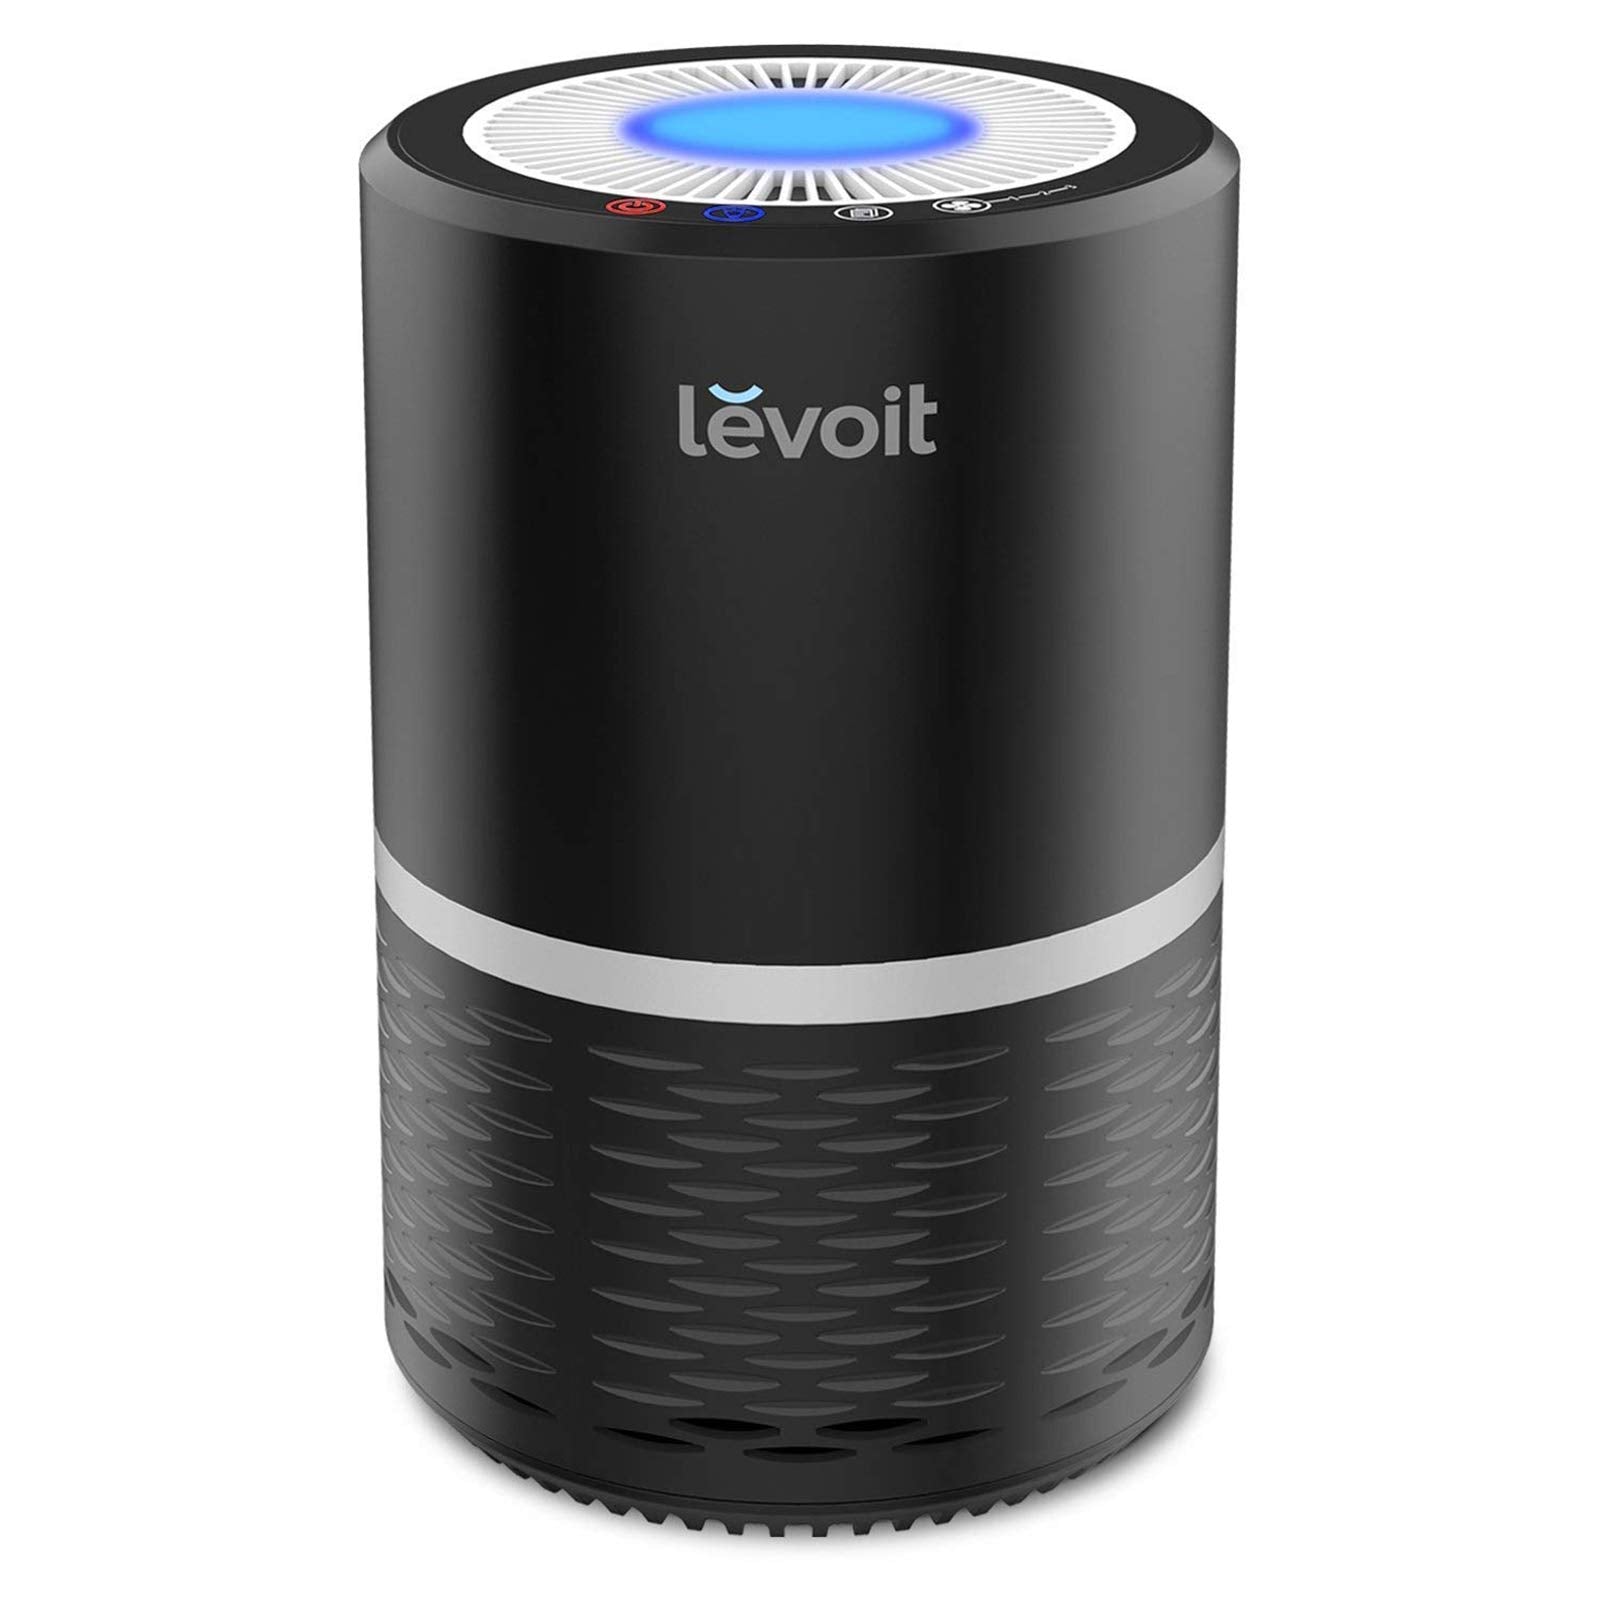 Levoit Air Purifier For Home With True Hepa Filter, Filter Change Reminder, Led Display Off Function, Portable Purifiers For Dust, Smokers, Pollen, Pet Dander, Hay Fever, Cooking Smell, Lv-H132 Black